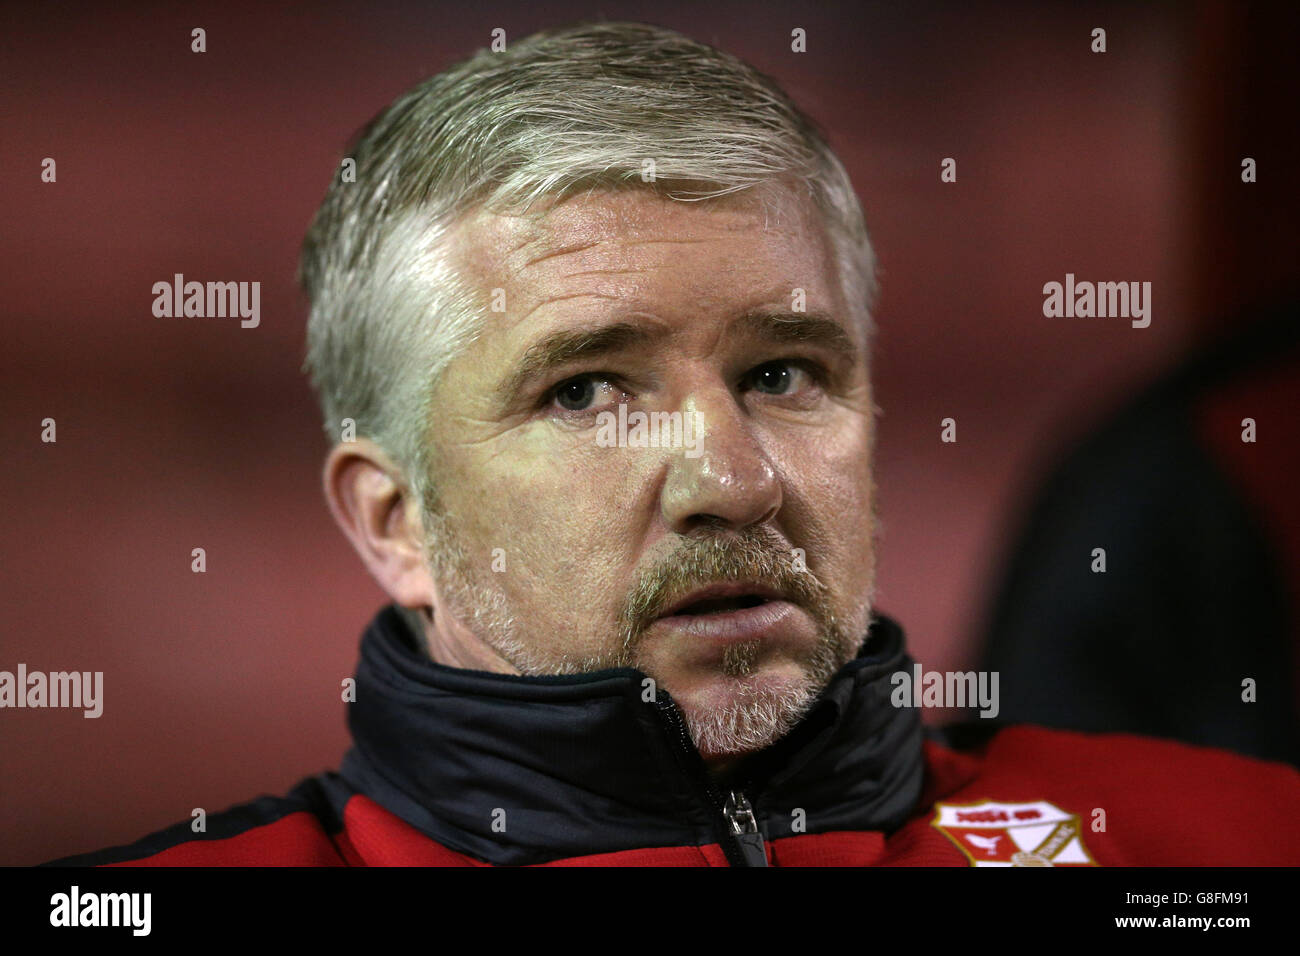 Swindon Town manager Martin Ling during the Sky Bet League One match at the County Ground, Swindon. Stock Photo